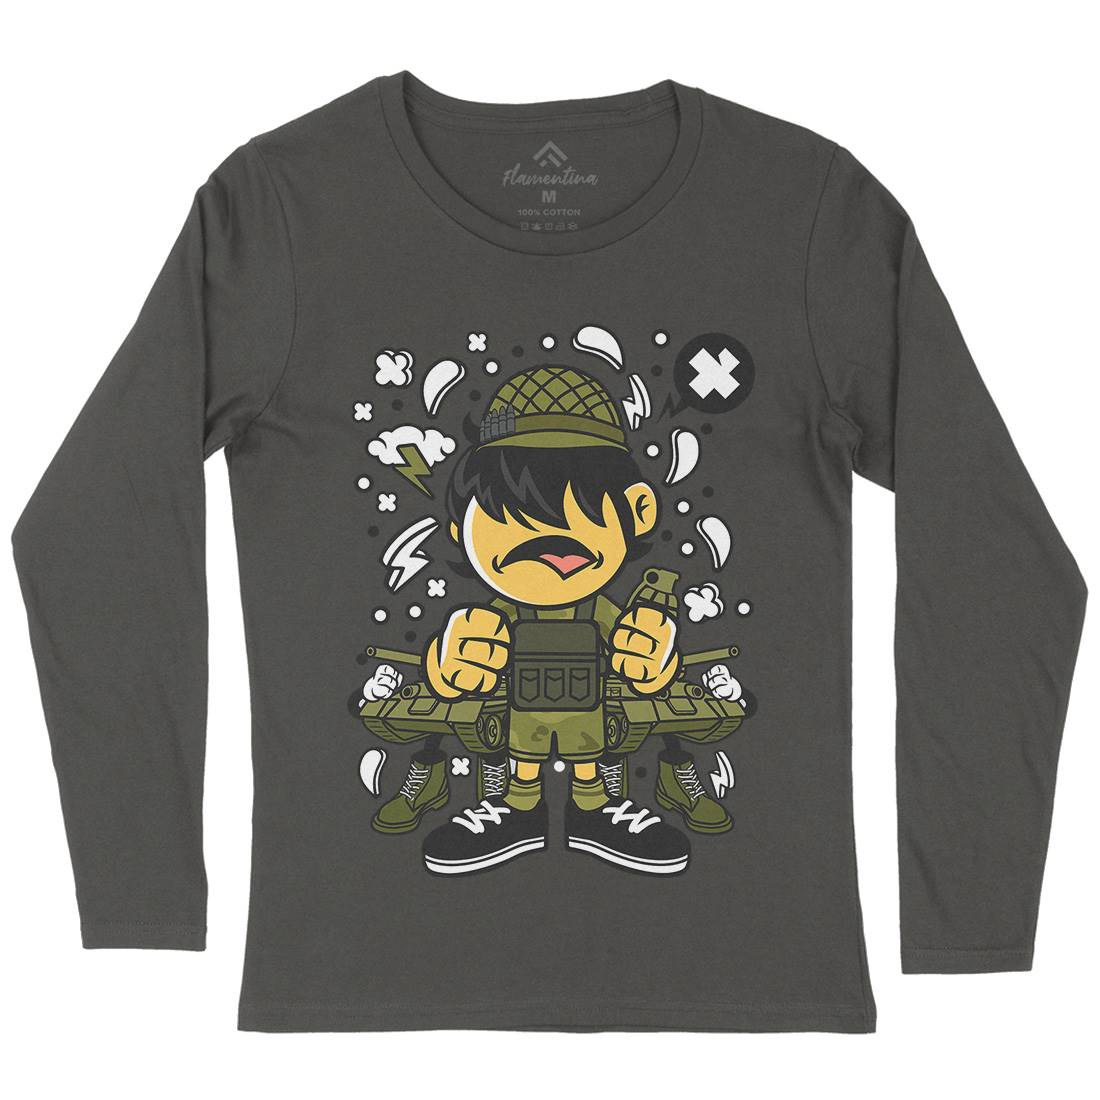 Soldier Kid Womens Long Sleeve T-Shirt Army C253